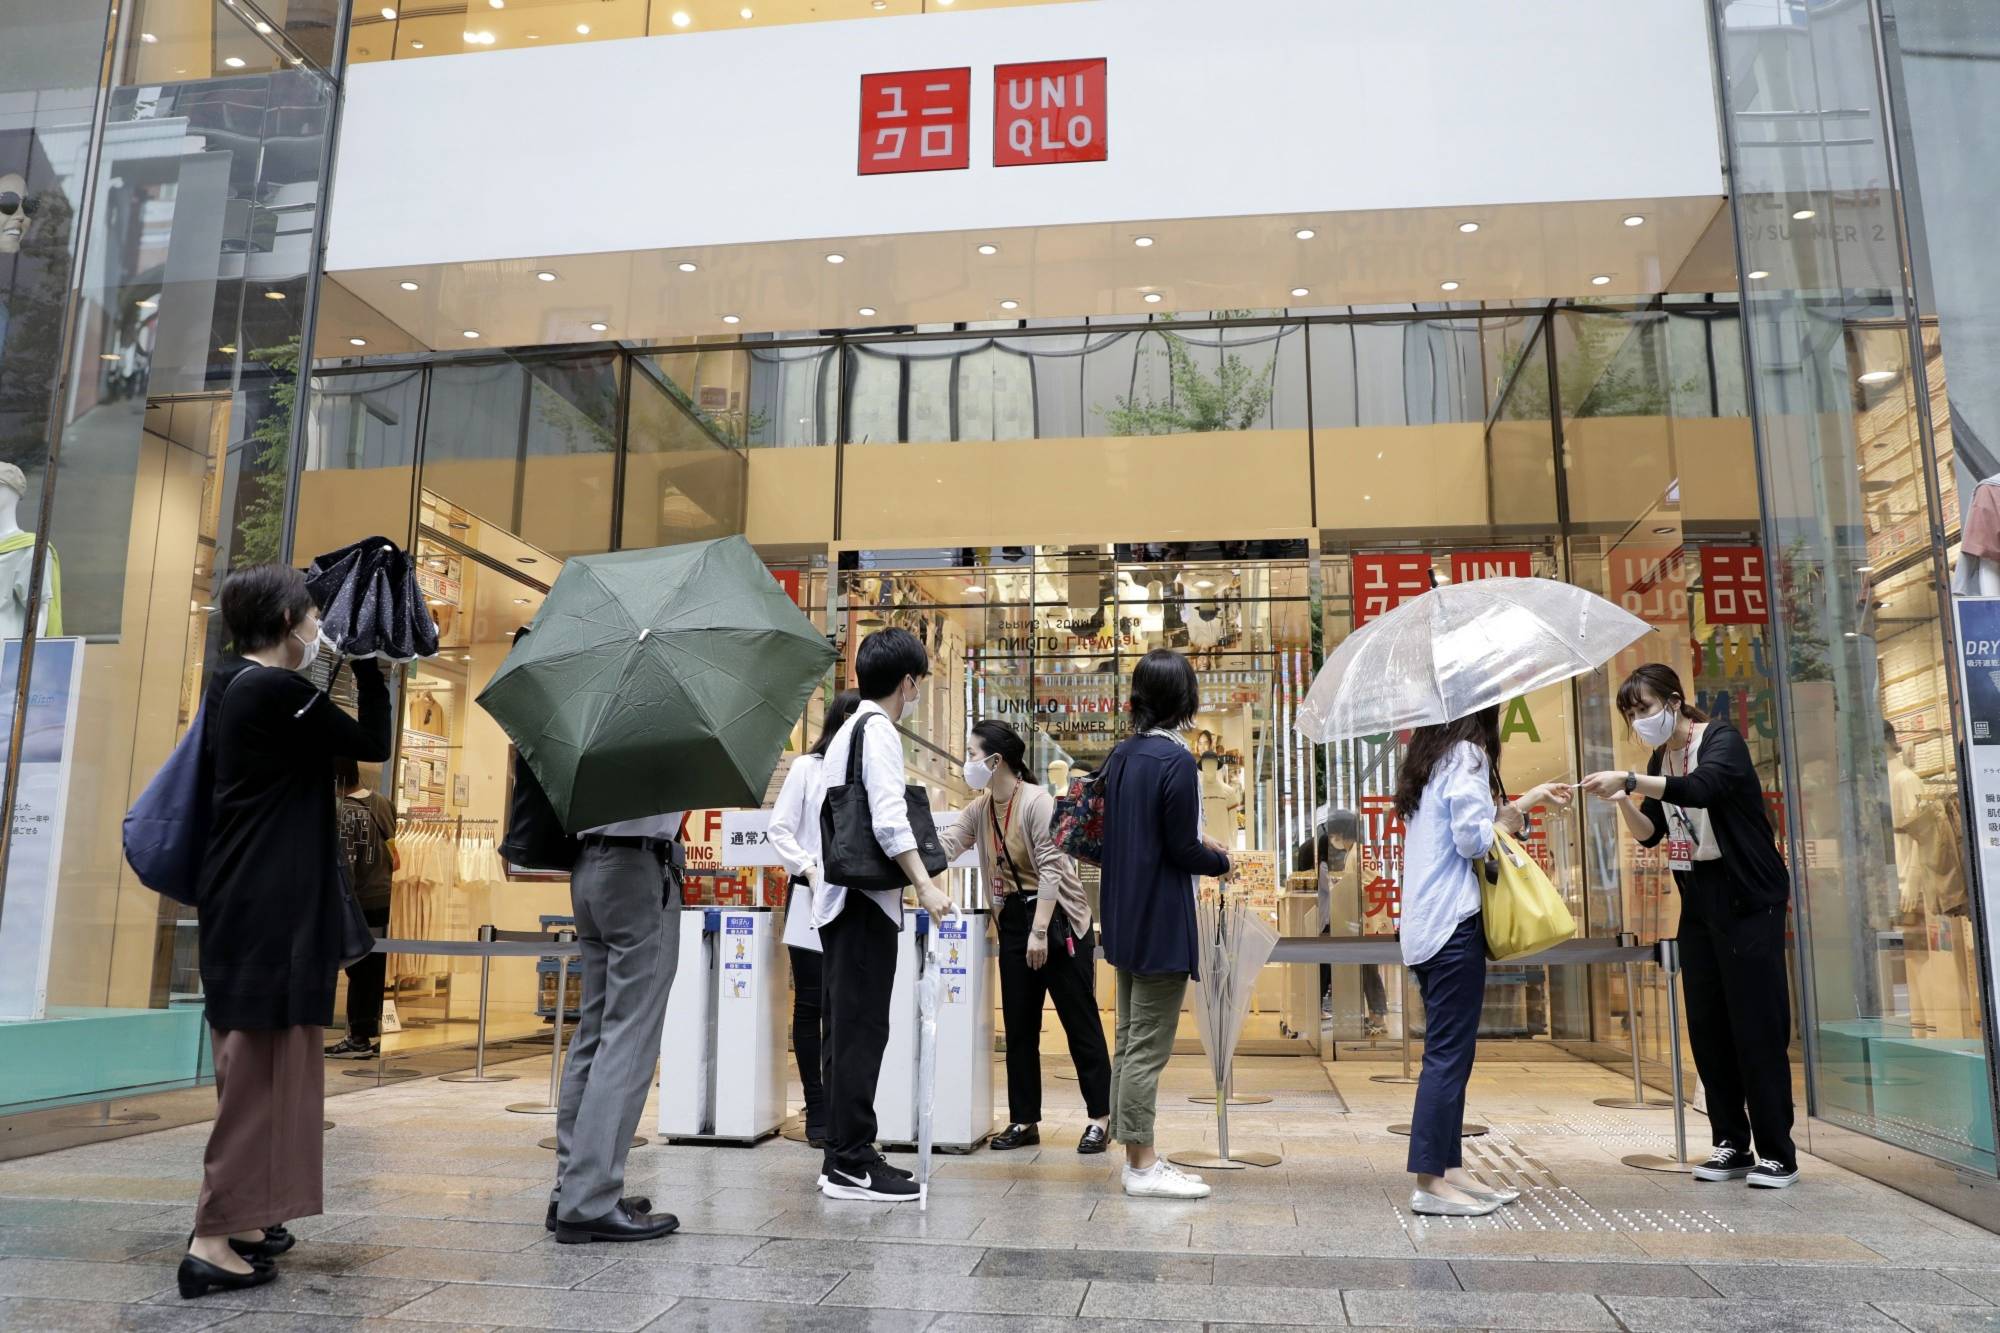 Fast Retailing Cautions About COVID19 Uncertainty Ahead for Uniqlo